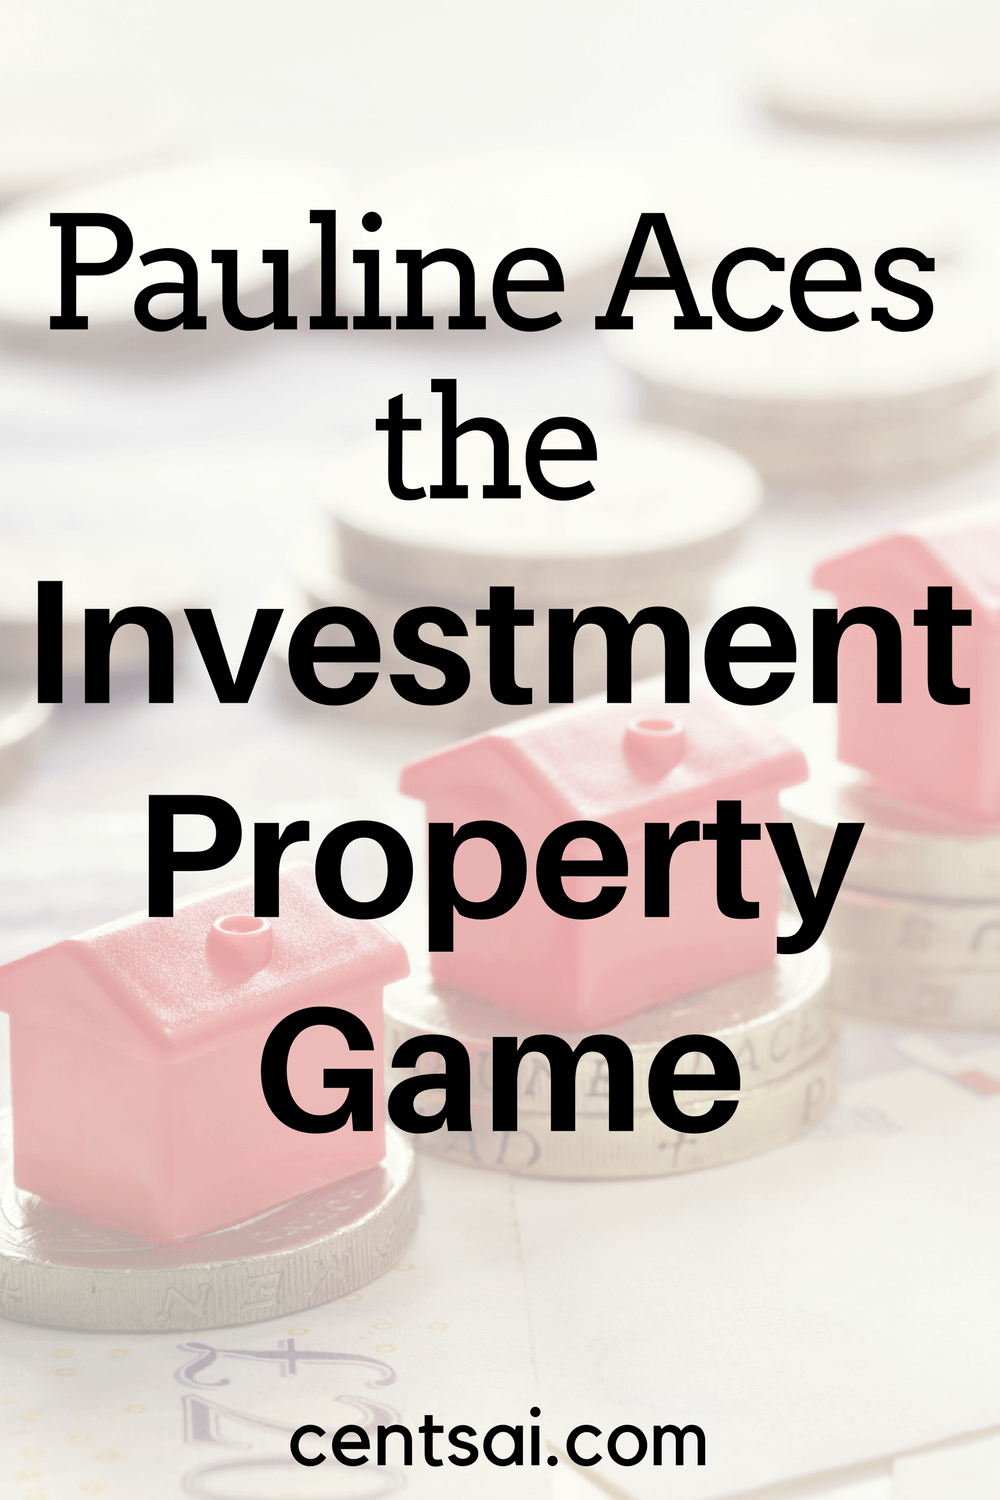 Pauline Aces the Investment Property Game. Renting out rooms in your house or apartment can help you cover the mortgage with ease – it's almost like getting the place for free!